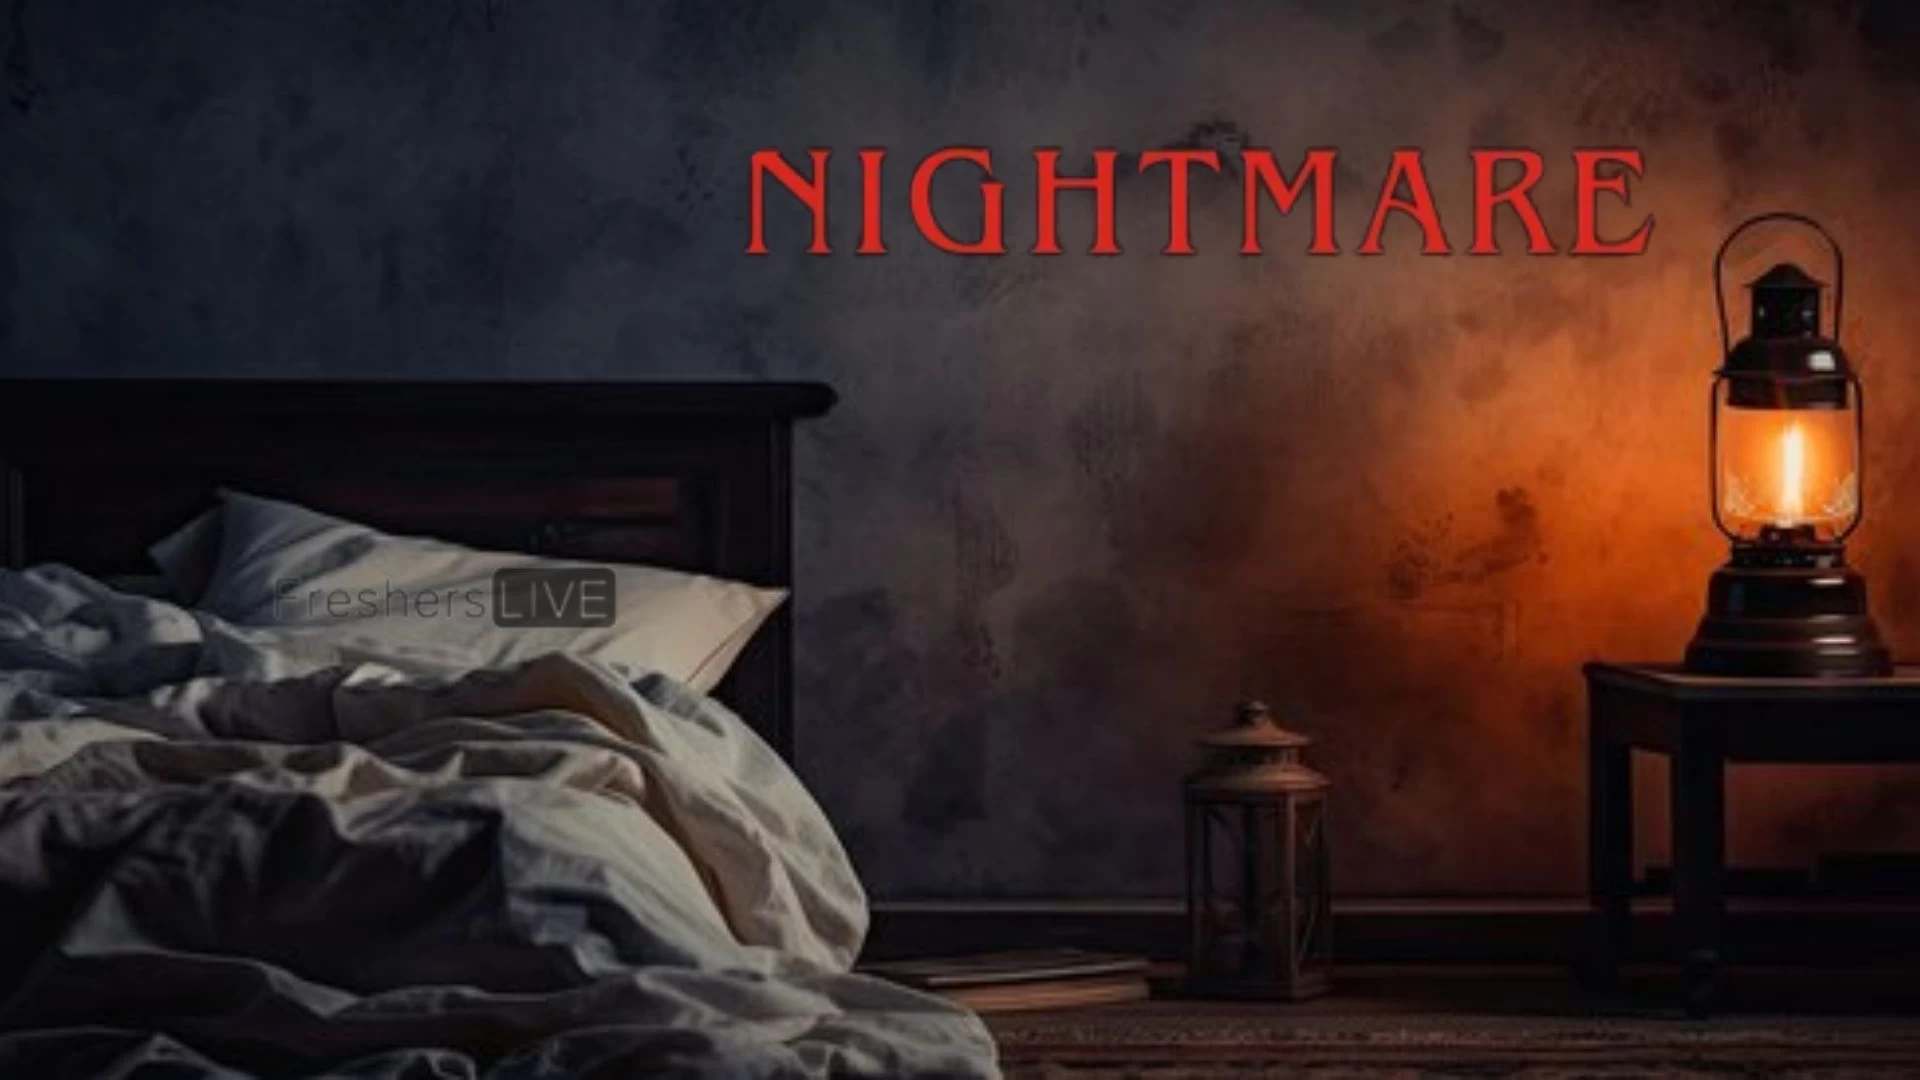 Nightmare 2023 Ending Explained, Release Date, Plot, Summary, Where to Watch and More